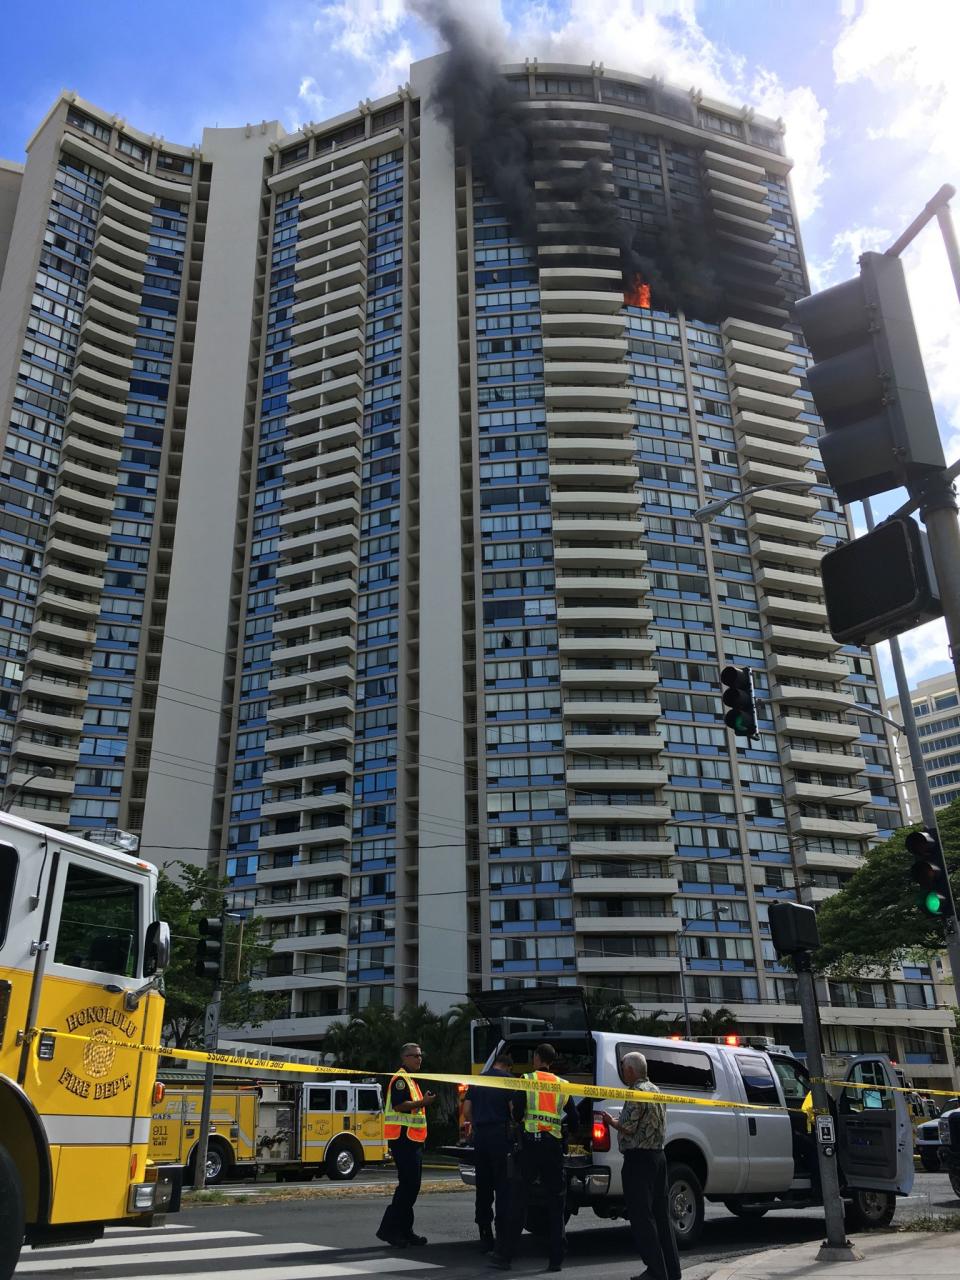 <p>Law enforcement officers stand at the scene of a multi-alarm fire at the Marco Polo apartment complex in Honolulu, Hawaii, Friday, July 14, 2017. (Photo: Marco Garcia/AP) </p>